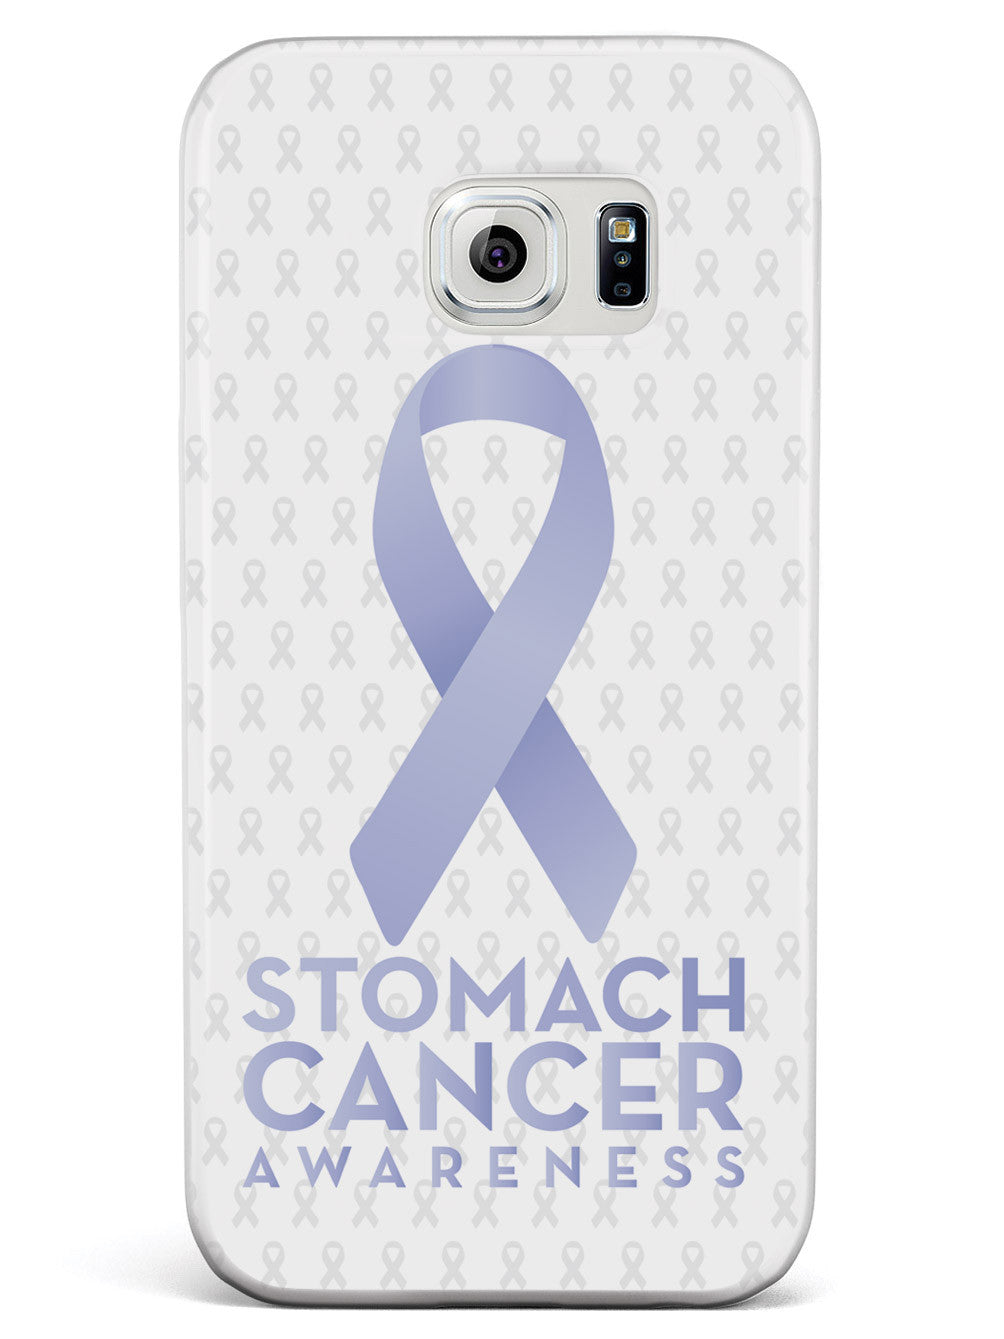 Stomach Cancer Awareness - White Case